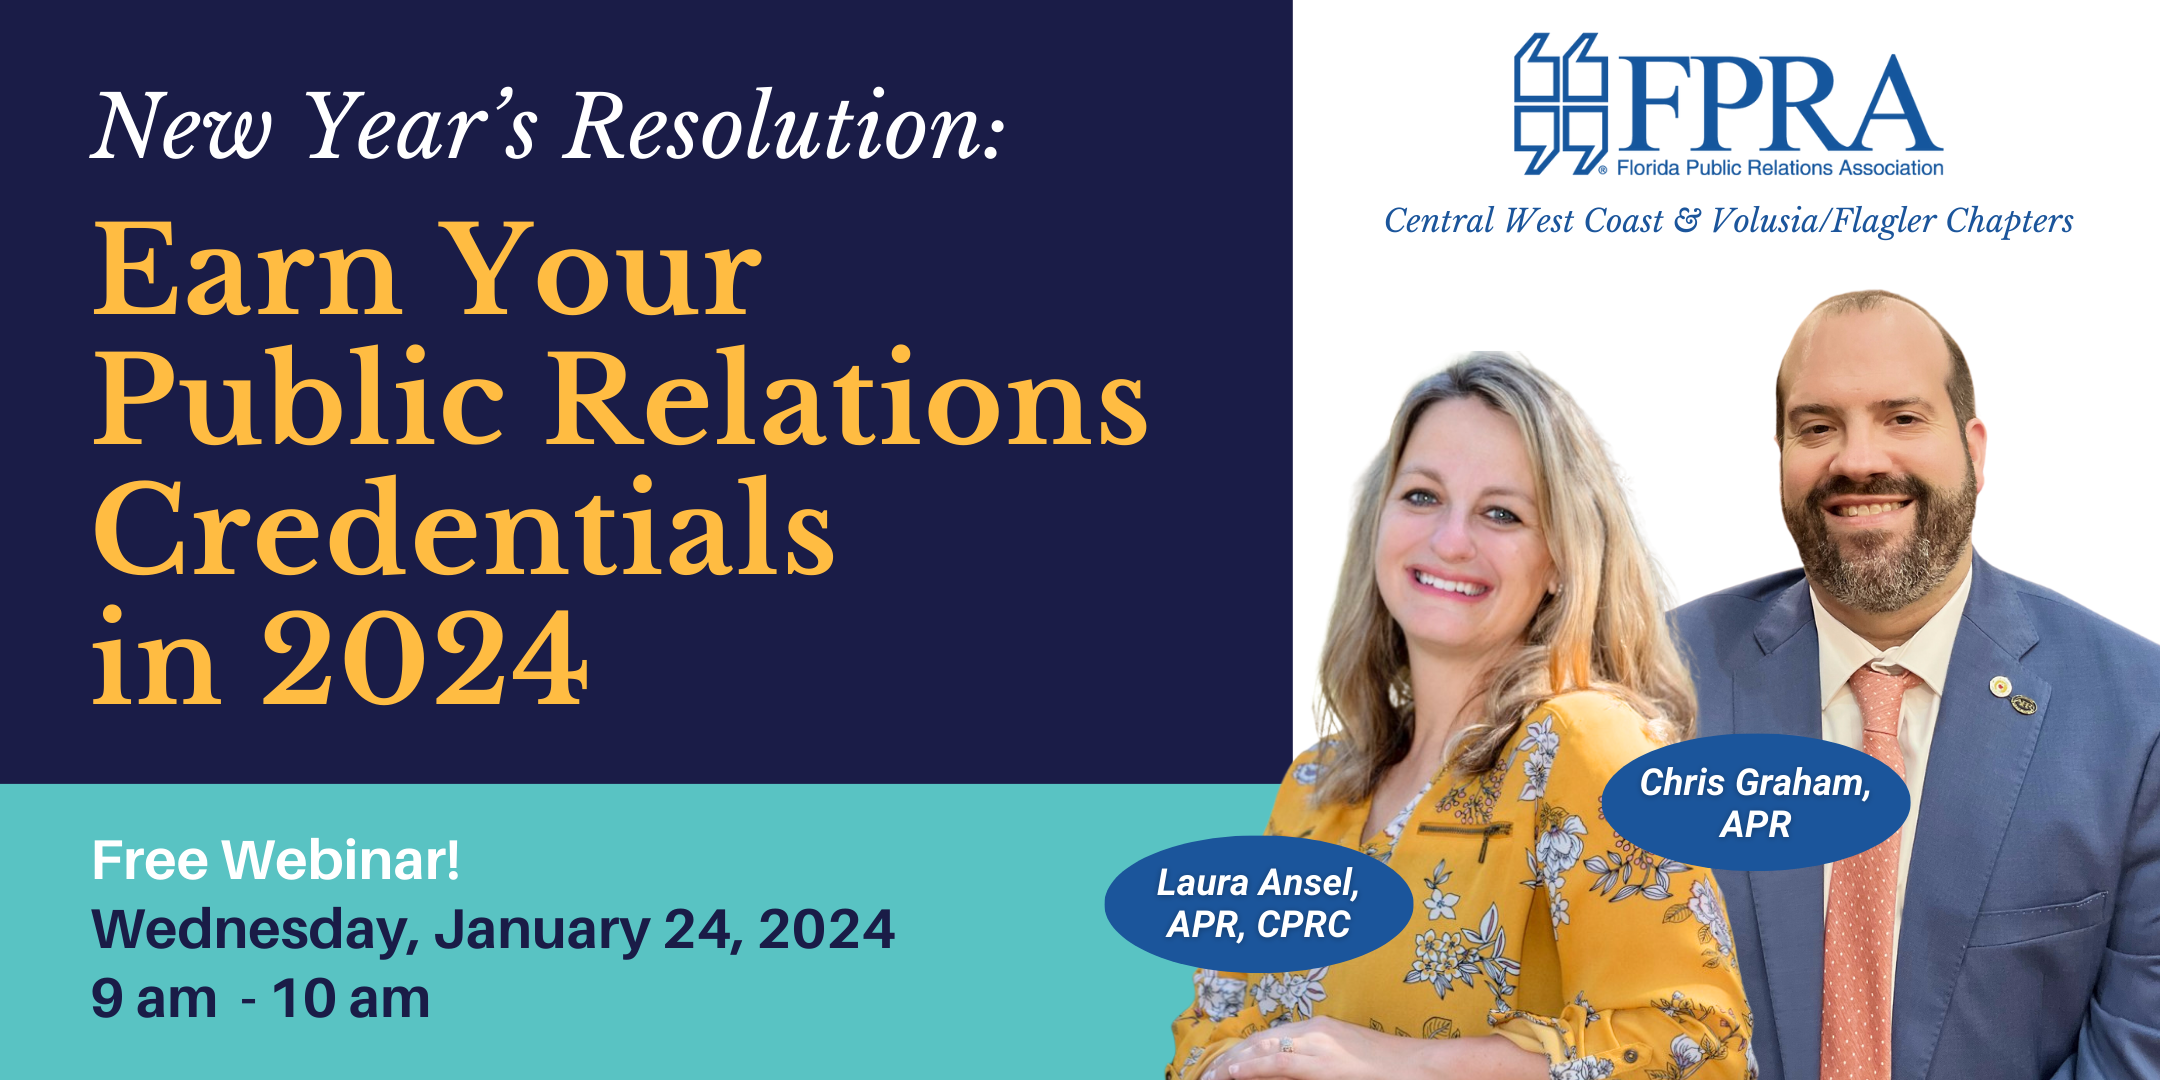 New Year’s Resolution: Earn Your Public Relations Credentials in 2024